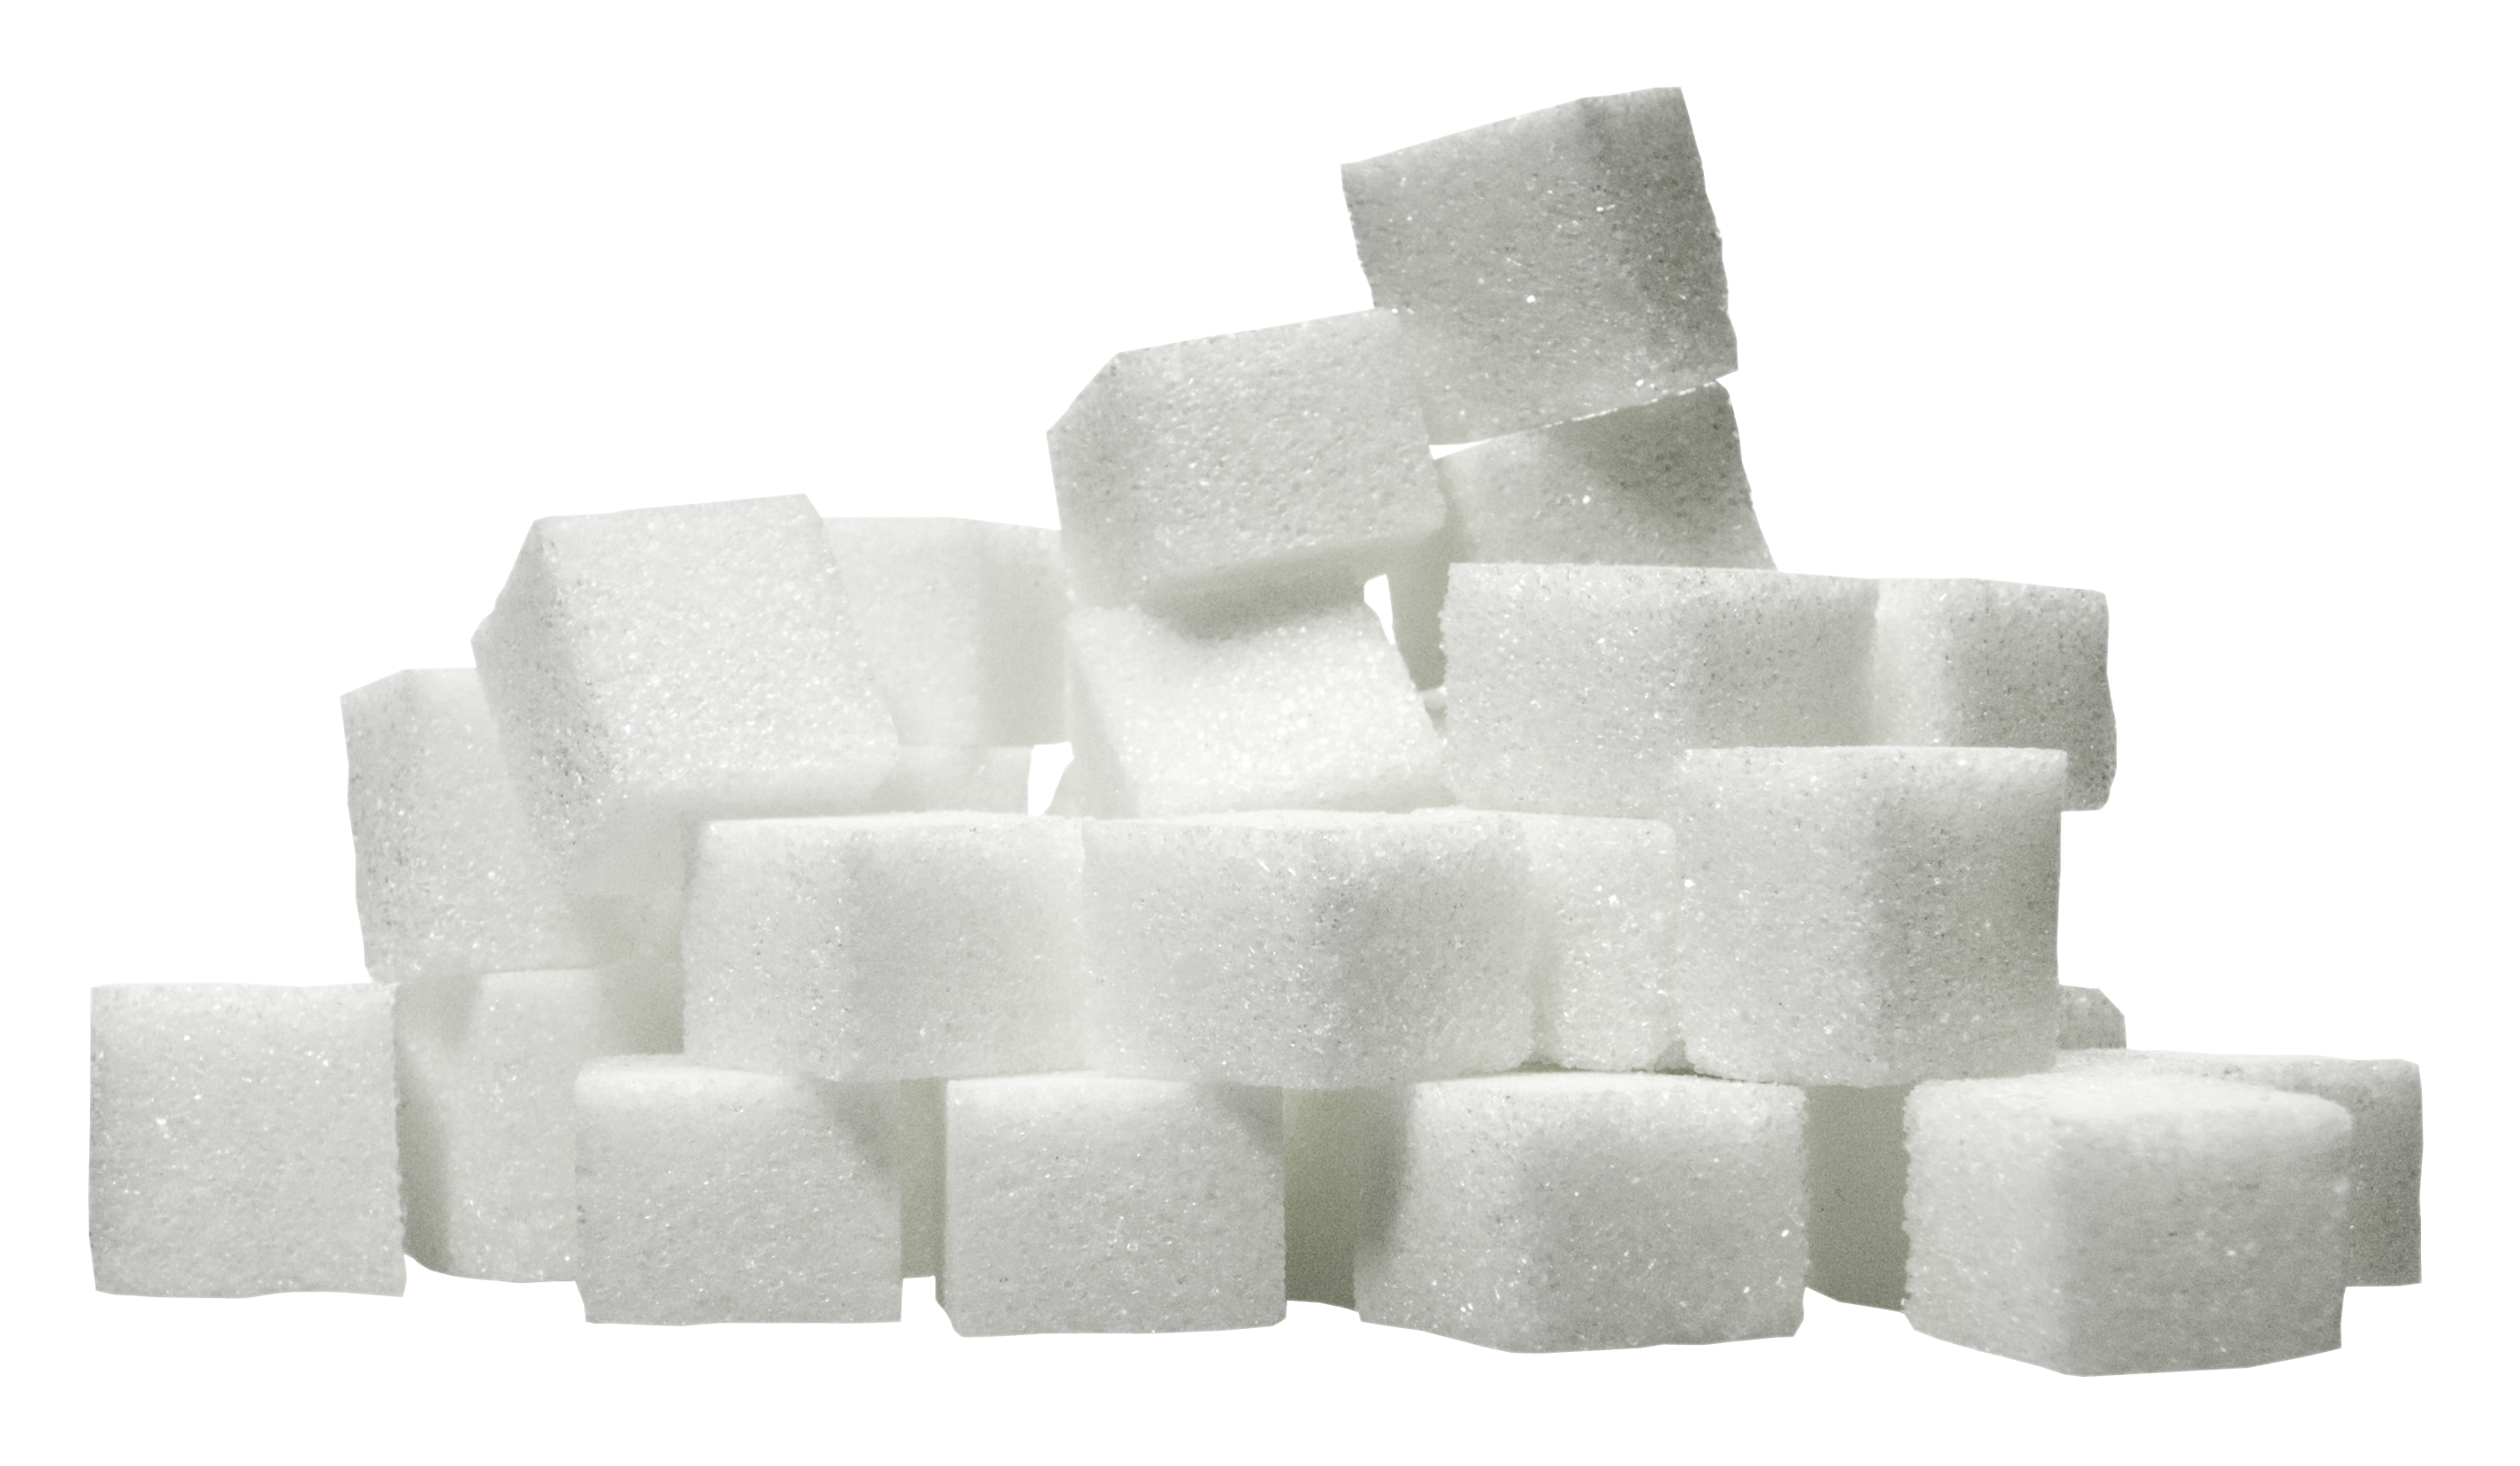 Refined sugar significantly r